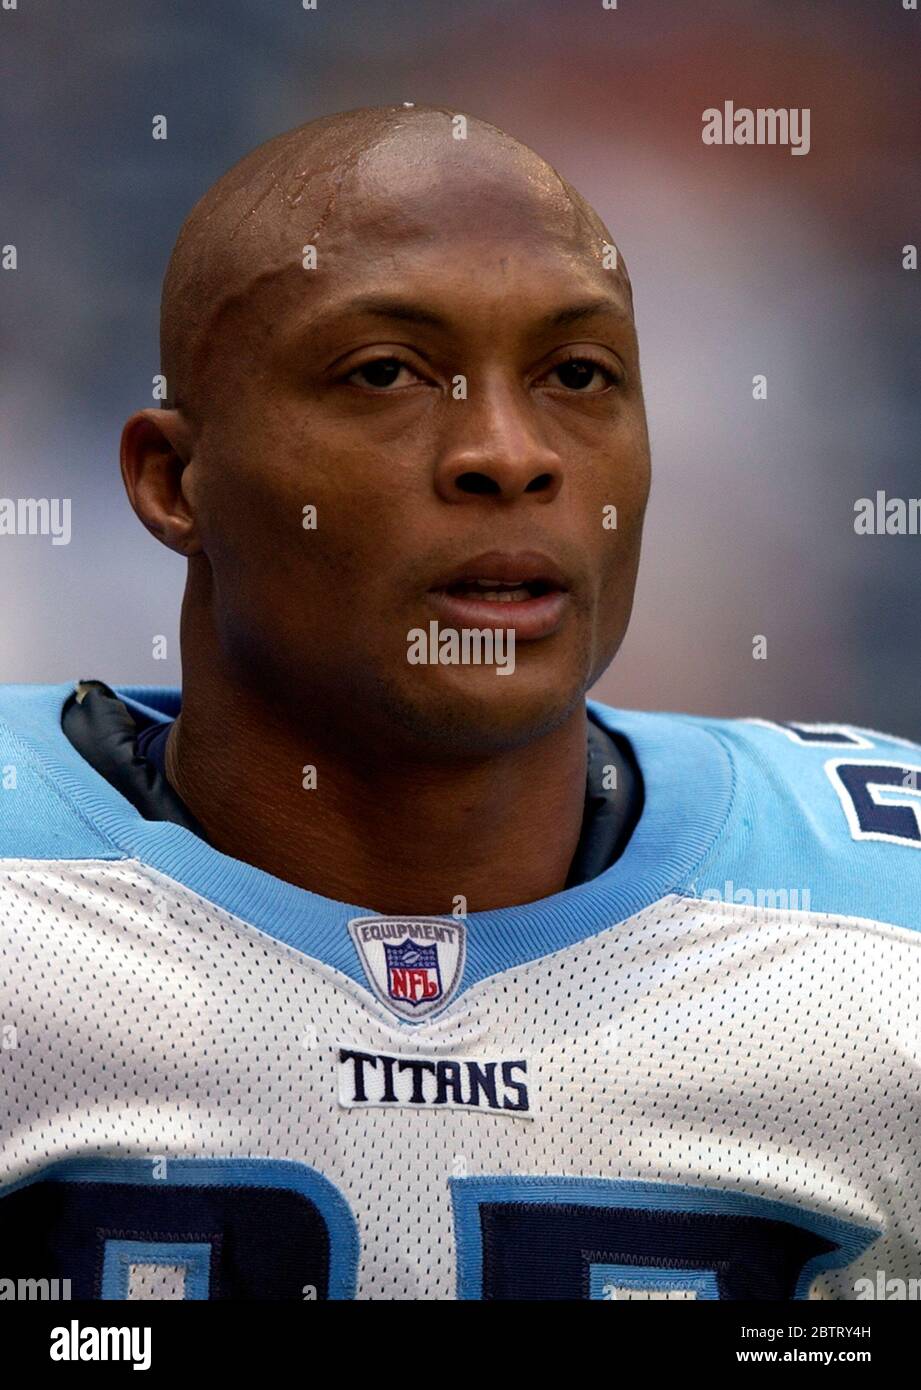 Tennessee Titans running back Eddie George during 27-24 victory over the  Houston Texans at Reliant Stadium in Houston on Sunday, Dec. 21, 2003.  Photo via Credit: Newscom/Alamy Live News Stock Photo - Alamy